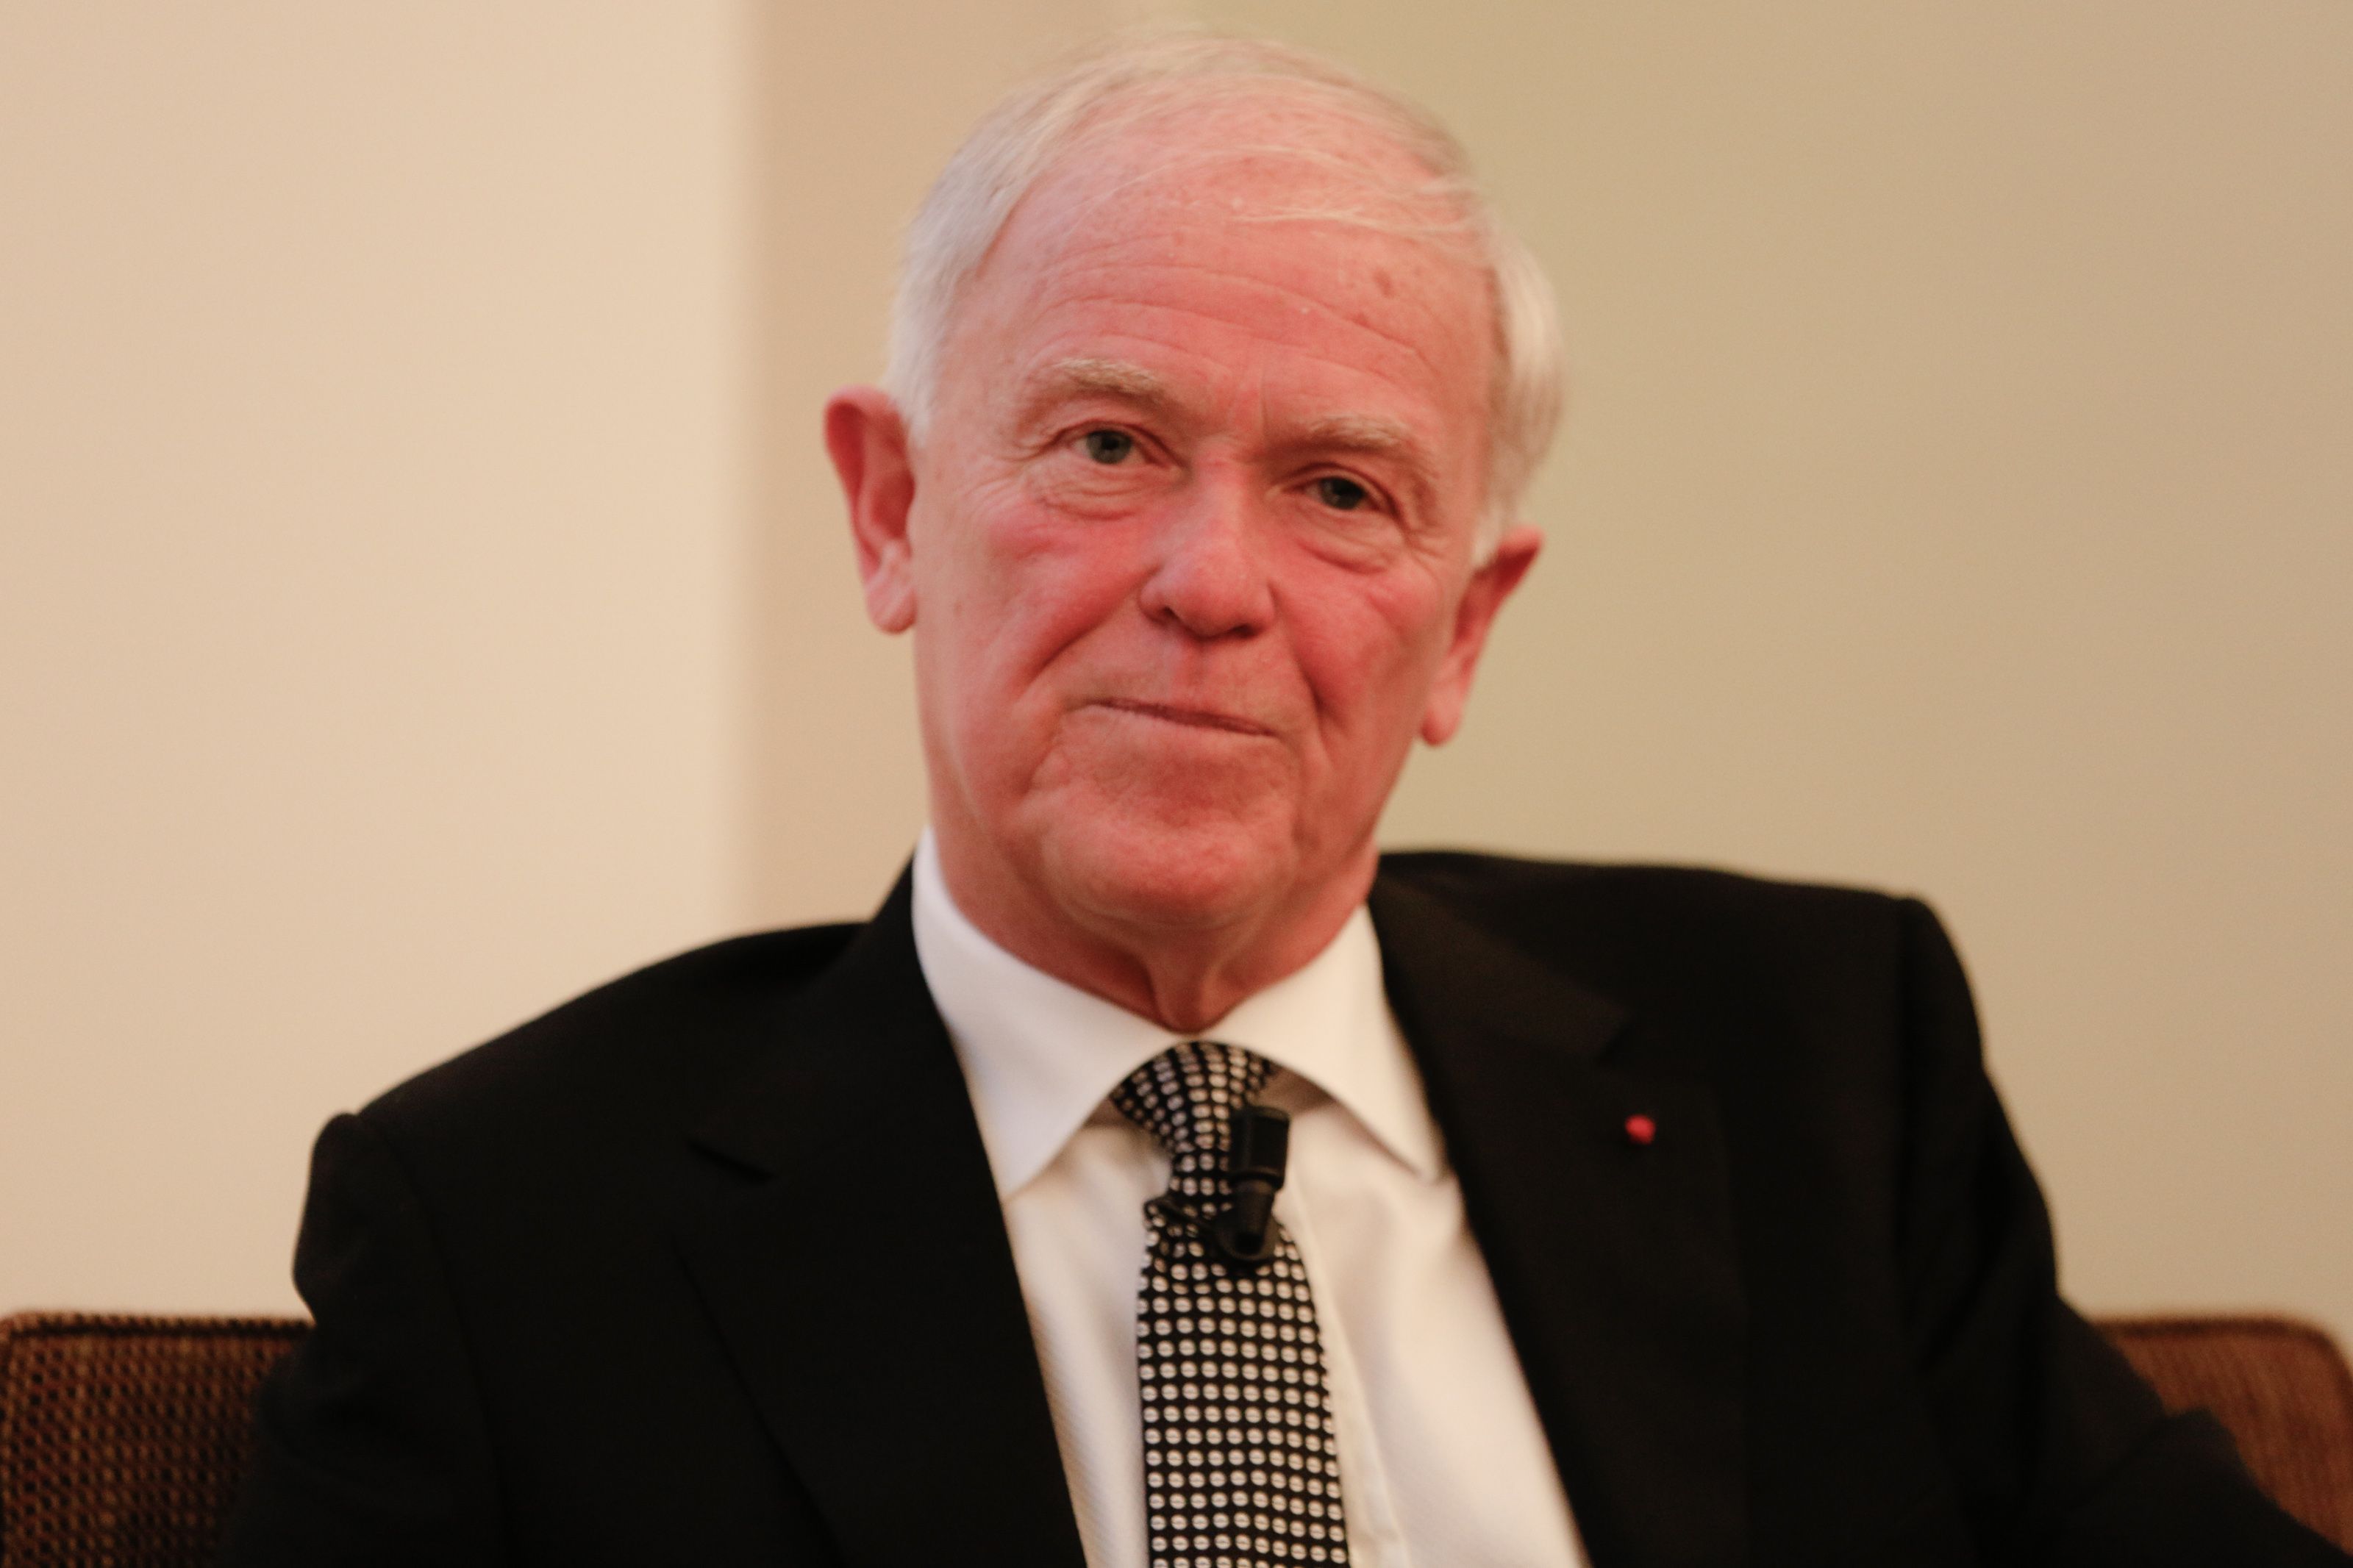 https://www.gettyimages.com.au/detail/news-photo/president-of-emirates-airline-sir-tim-clark-attends-a-panel-news-photo/465222452?adppopup=true